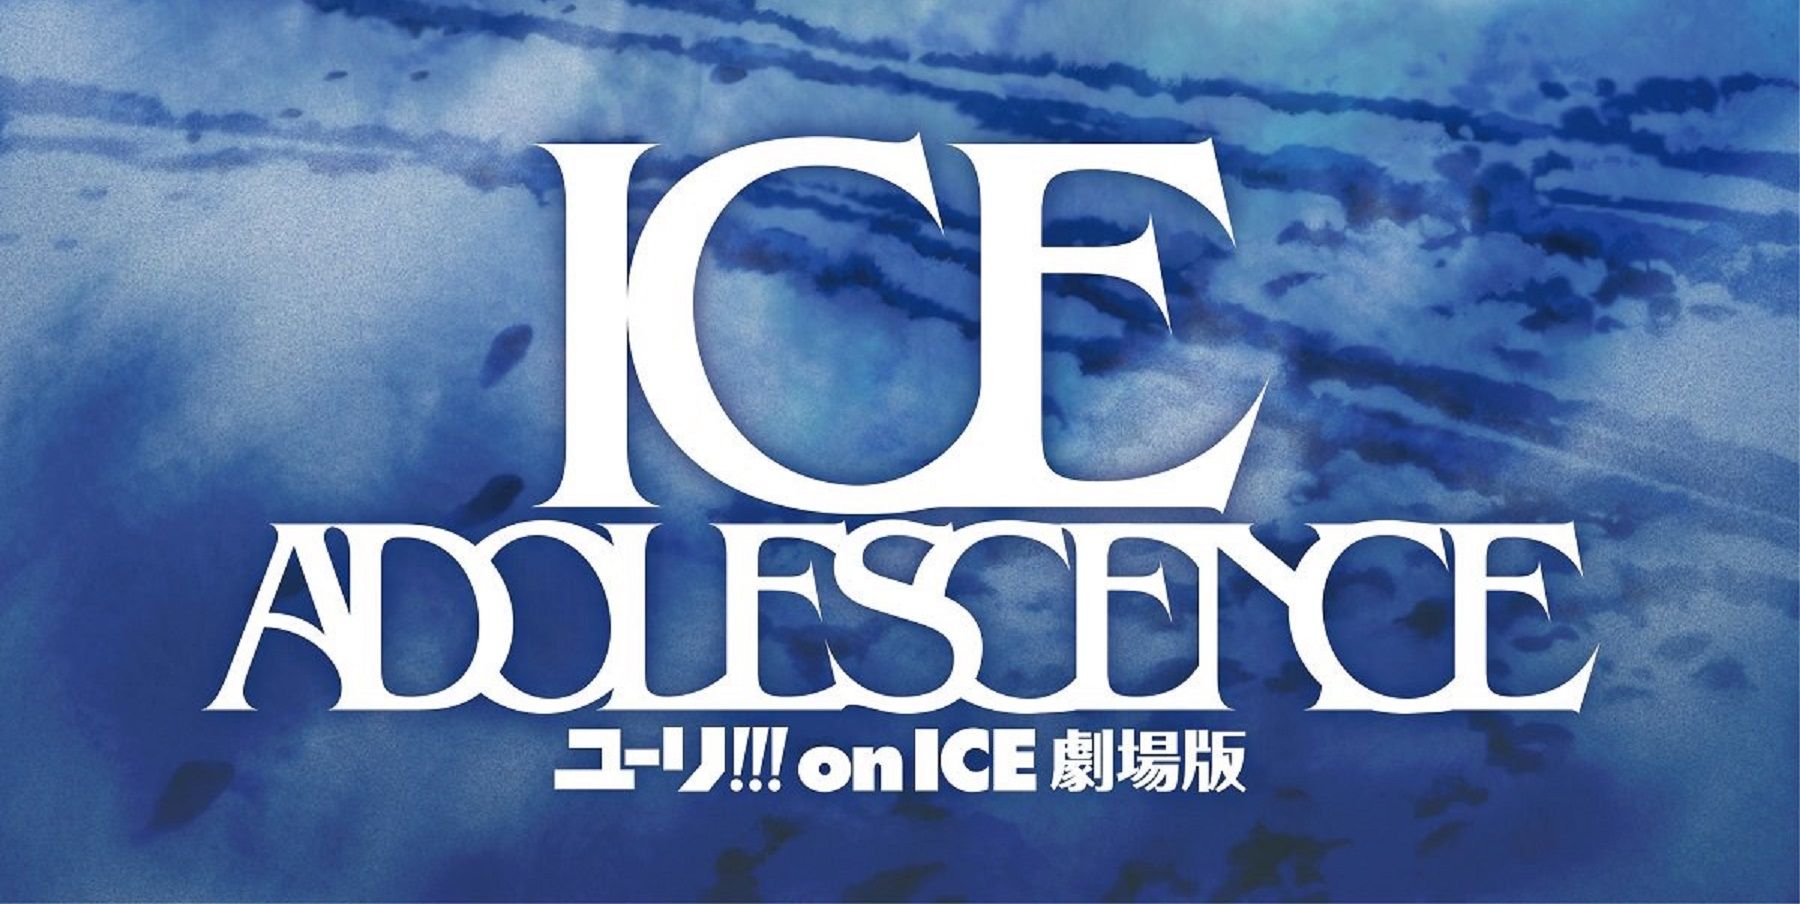 Yuri on ice movie poster cropped